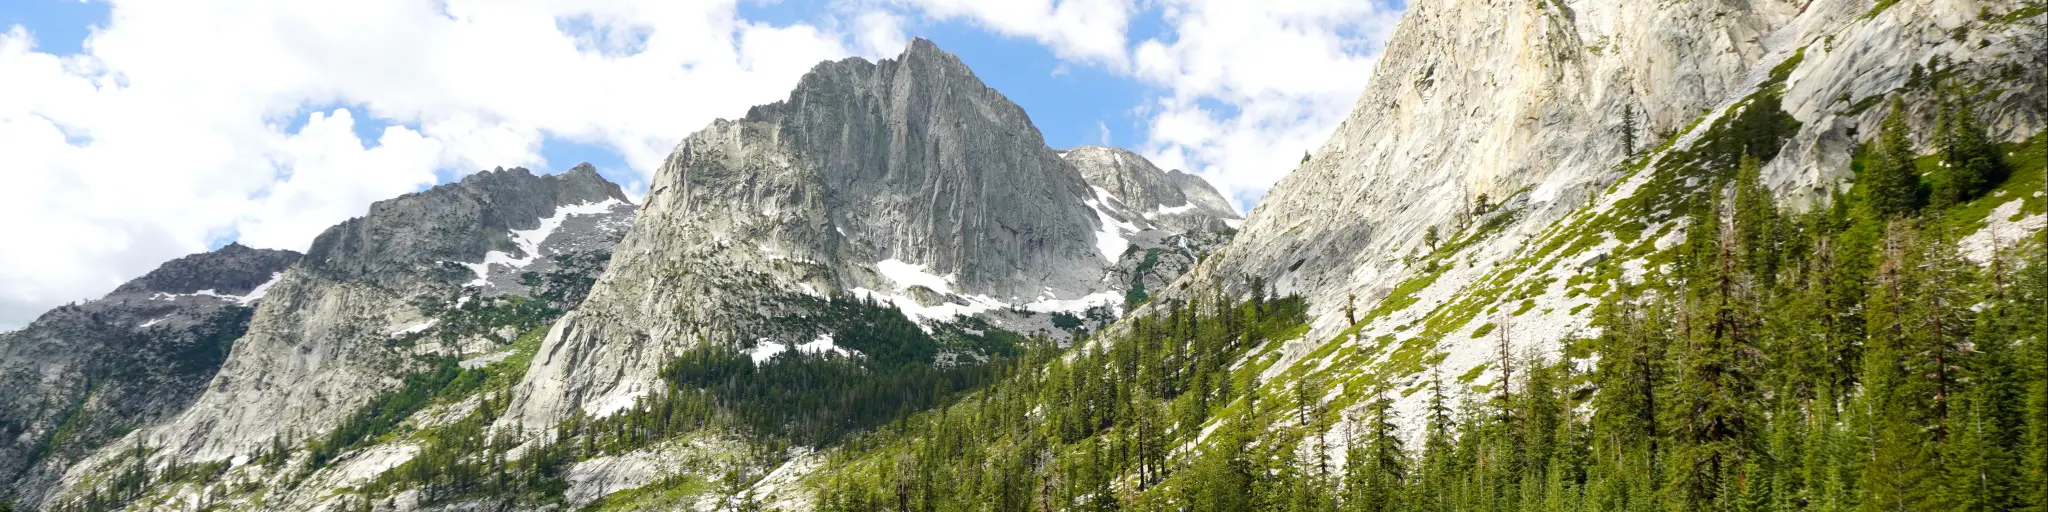 Views of mountains and forests along John Muir Trail